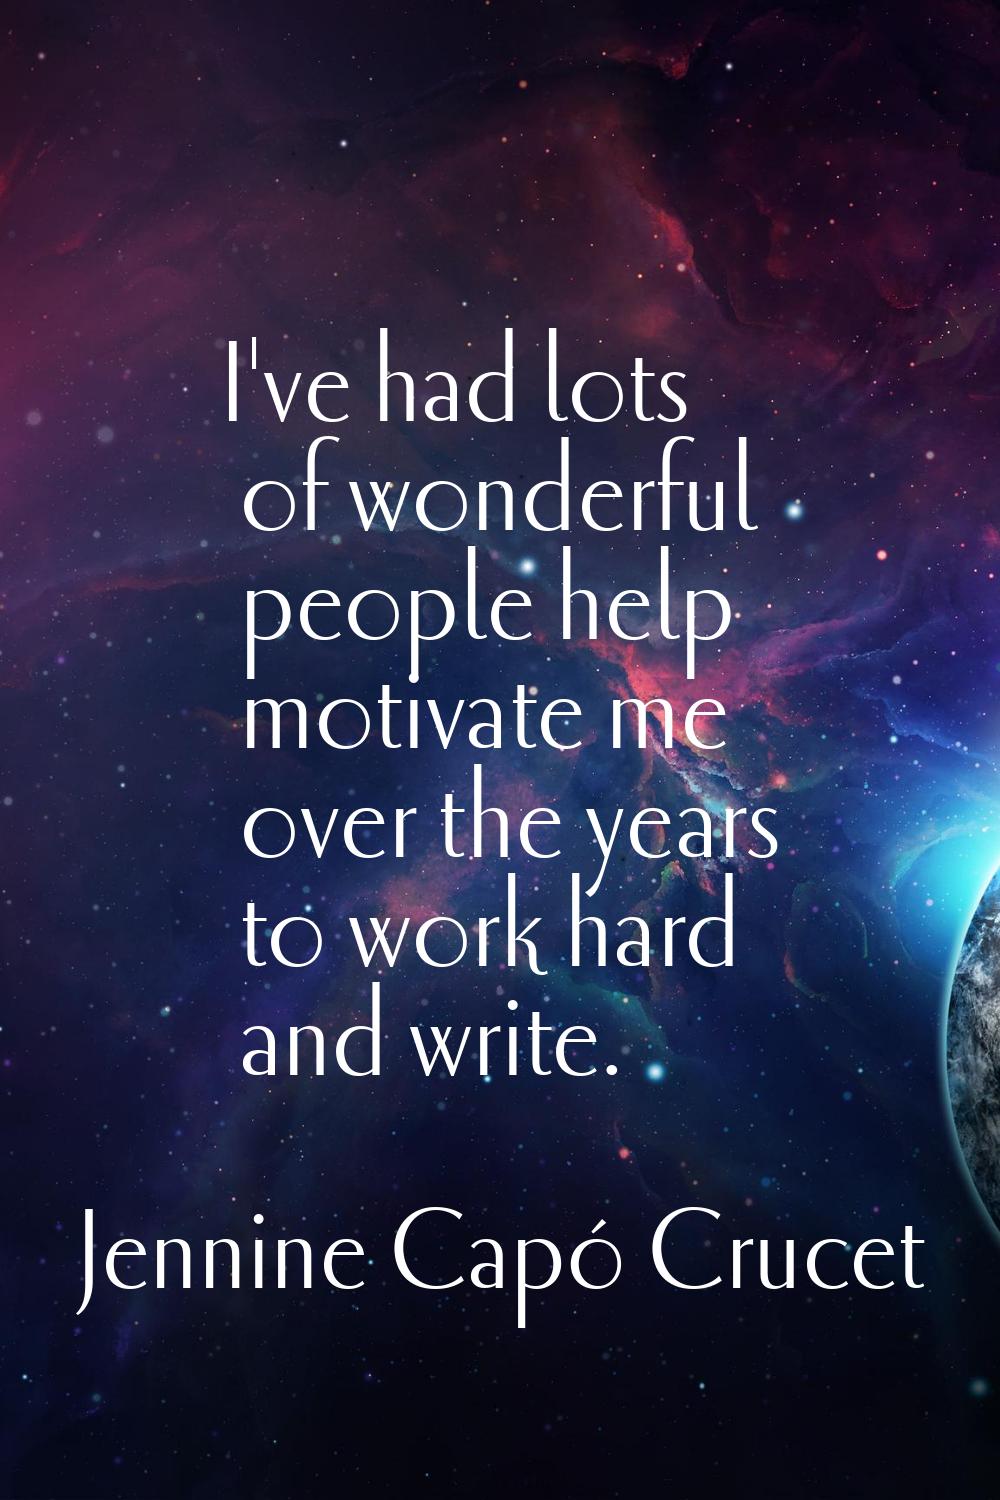 I've had lots of wonderful people help motivate me over the years to work hard and write.